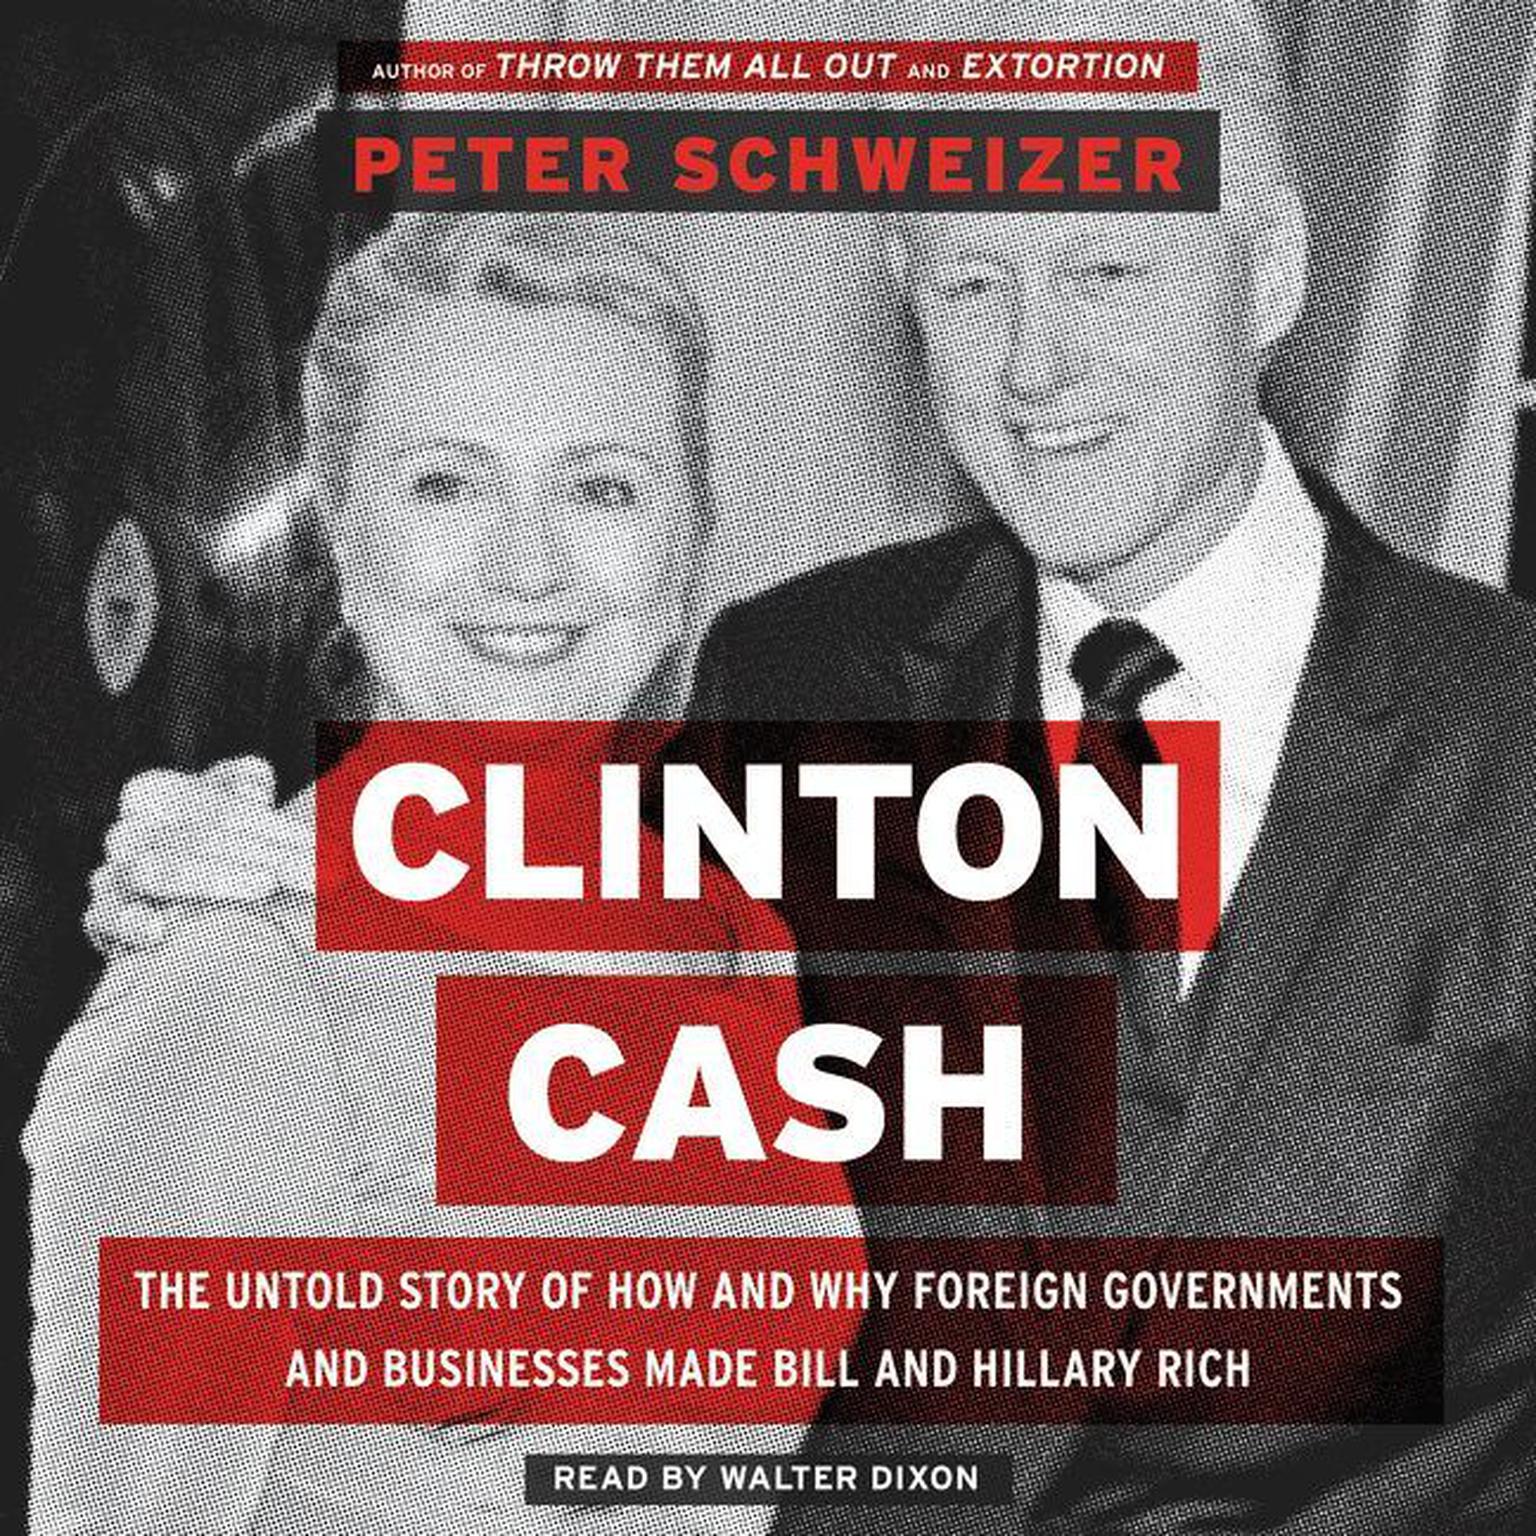 Clinton Cash: The Untold Story of How and Why Foreign Governments and Businesses Helped Make Bill and Hillary Rich Audiobook, by Peter Schweizer